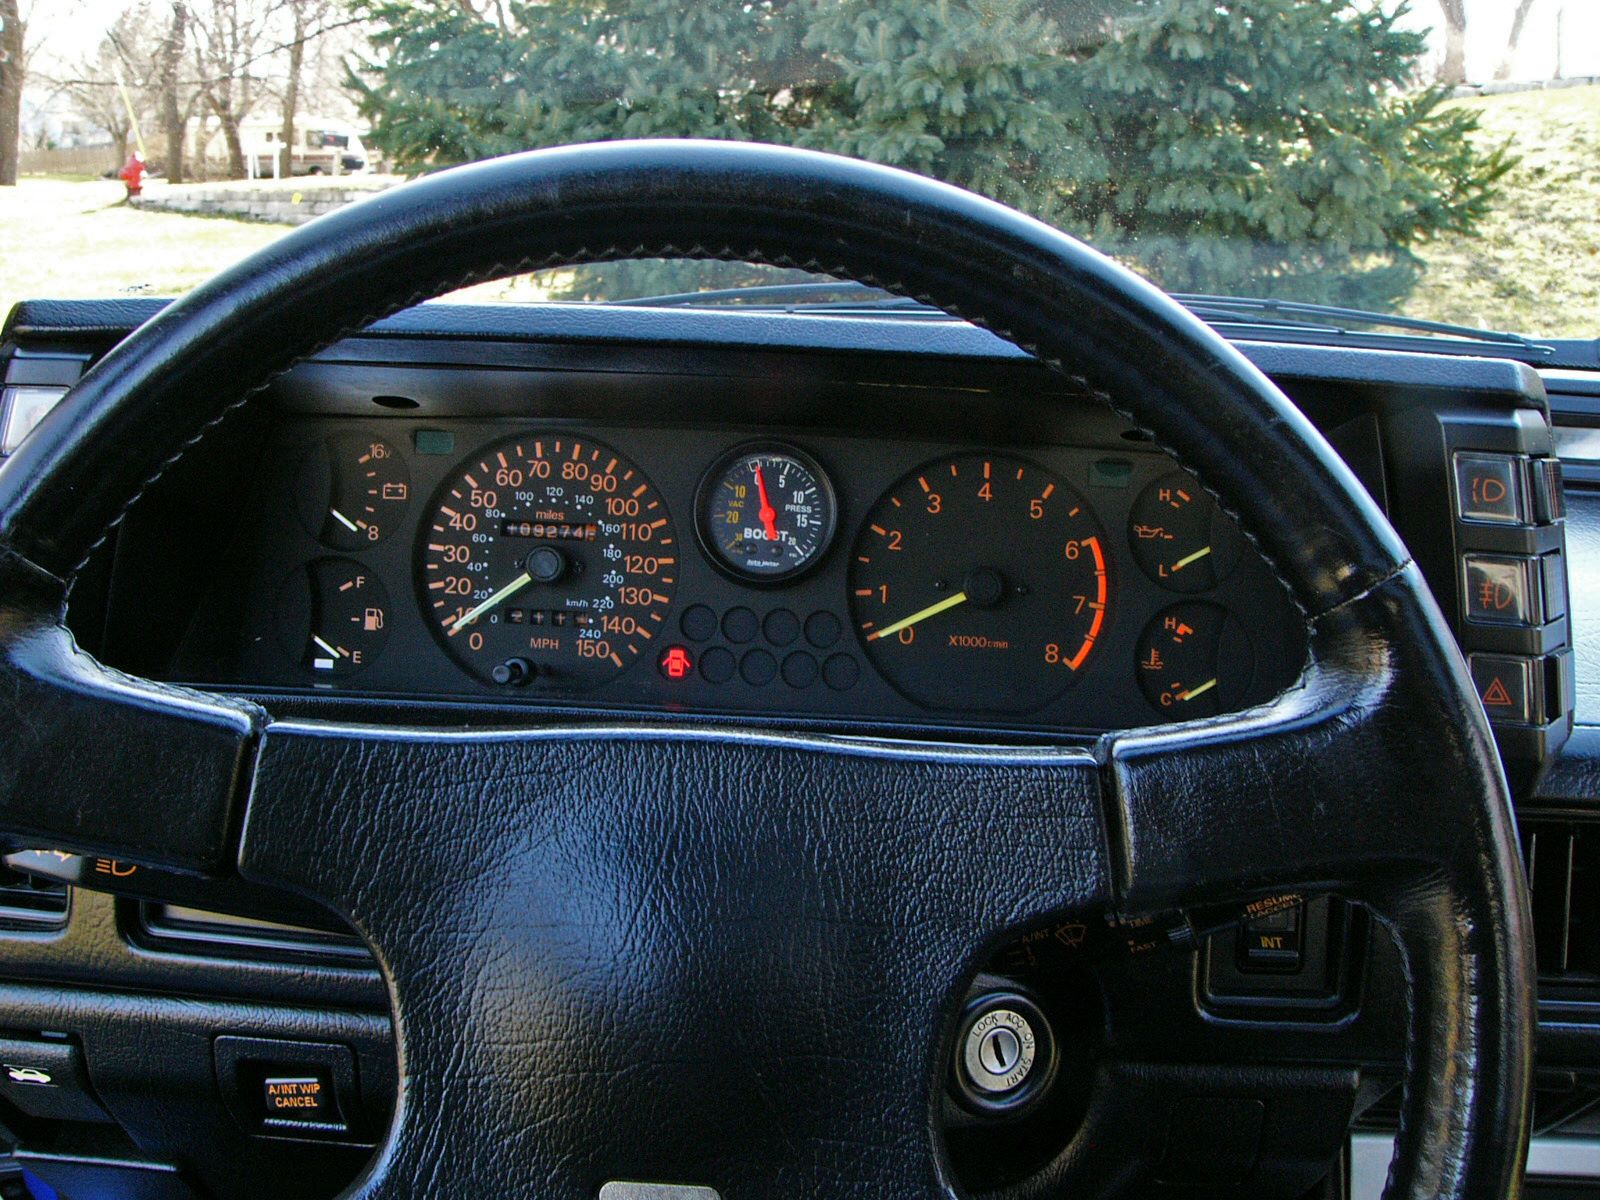 Driver's view